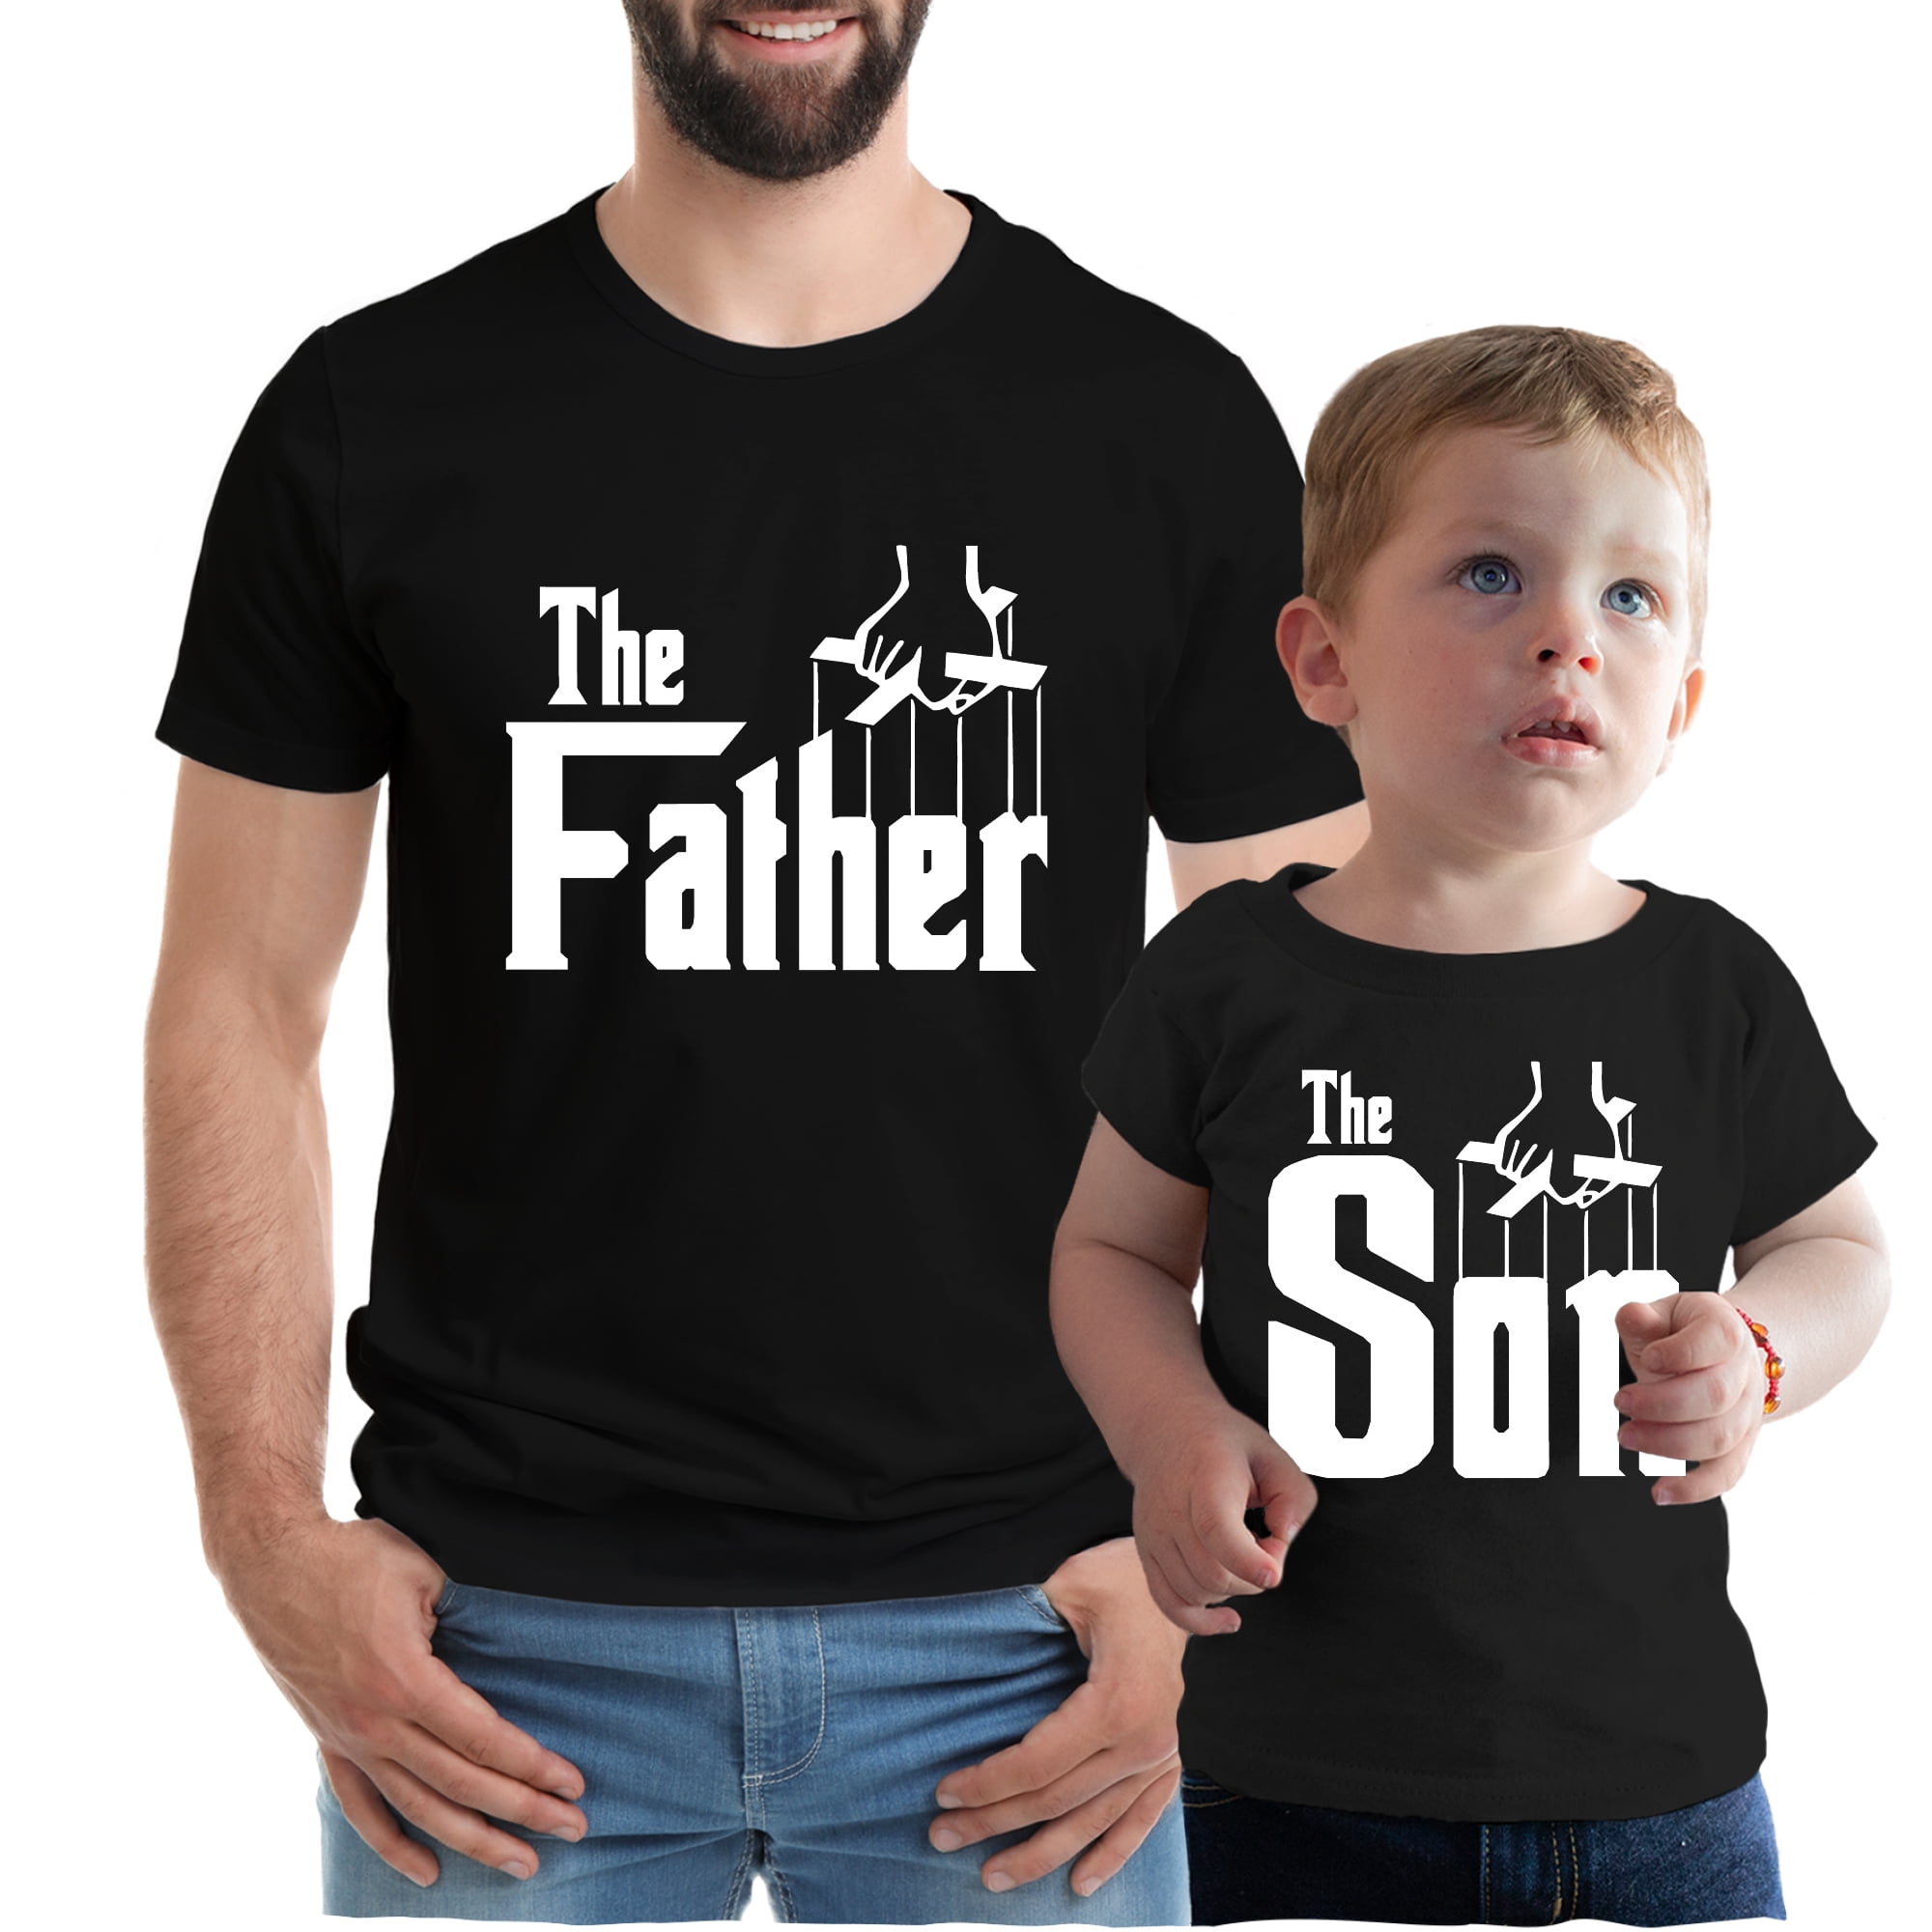 Texas Tees, Father Son Shirts, Daddy and Me Outfits, The Son & The Father